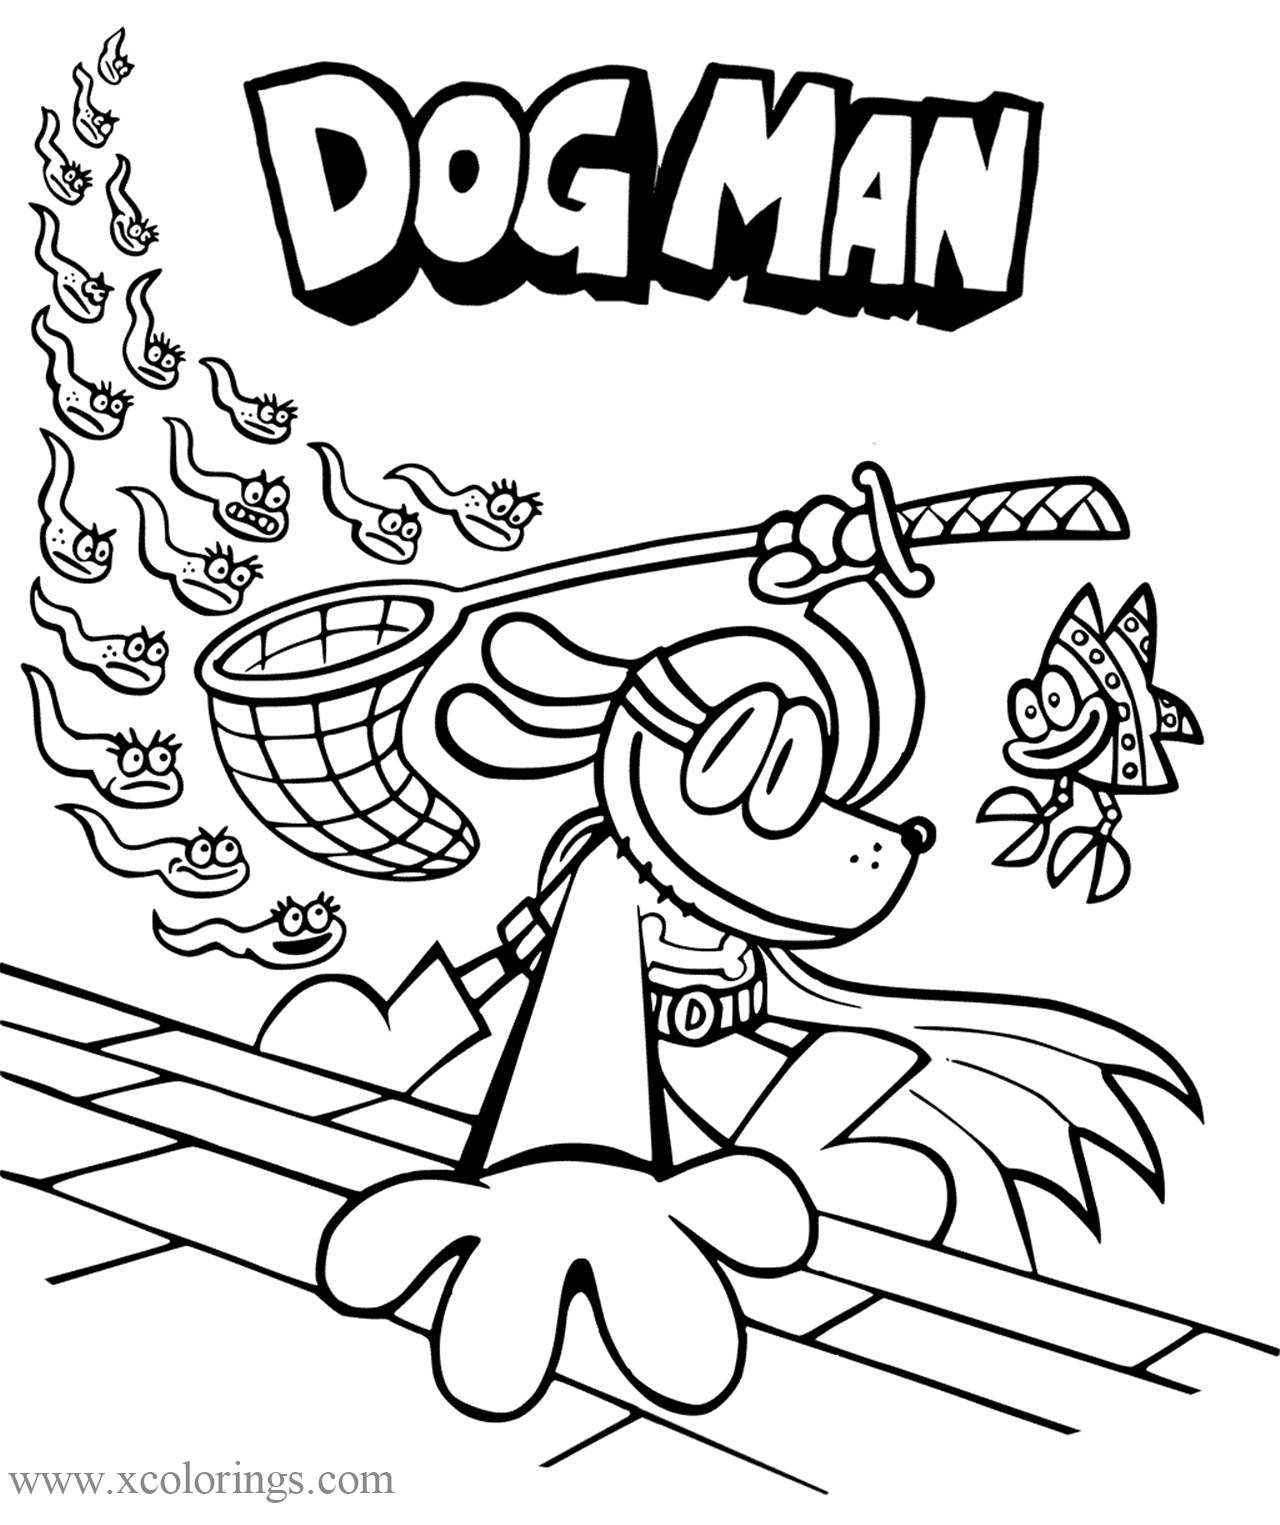 Dog Man Coloring Pages Archives XColorings